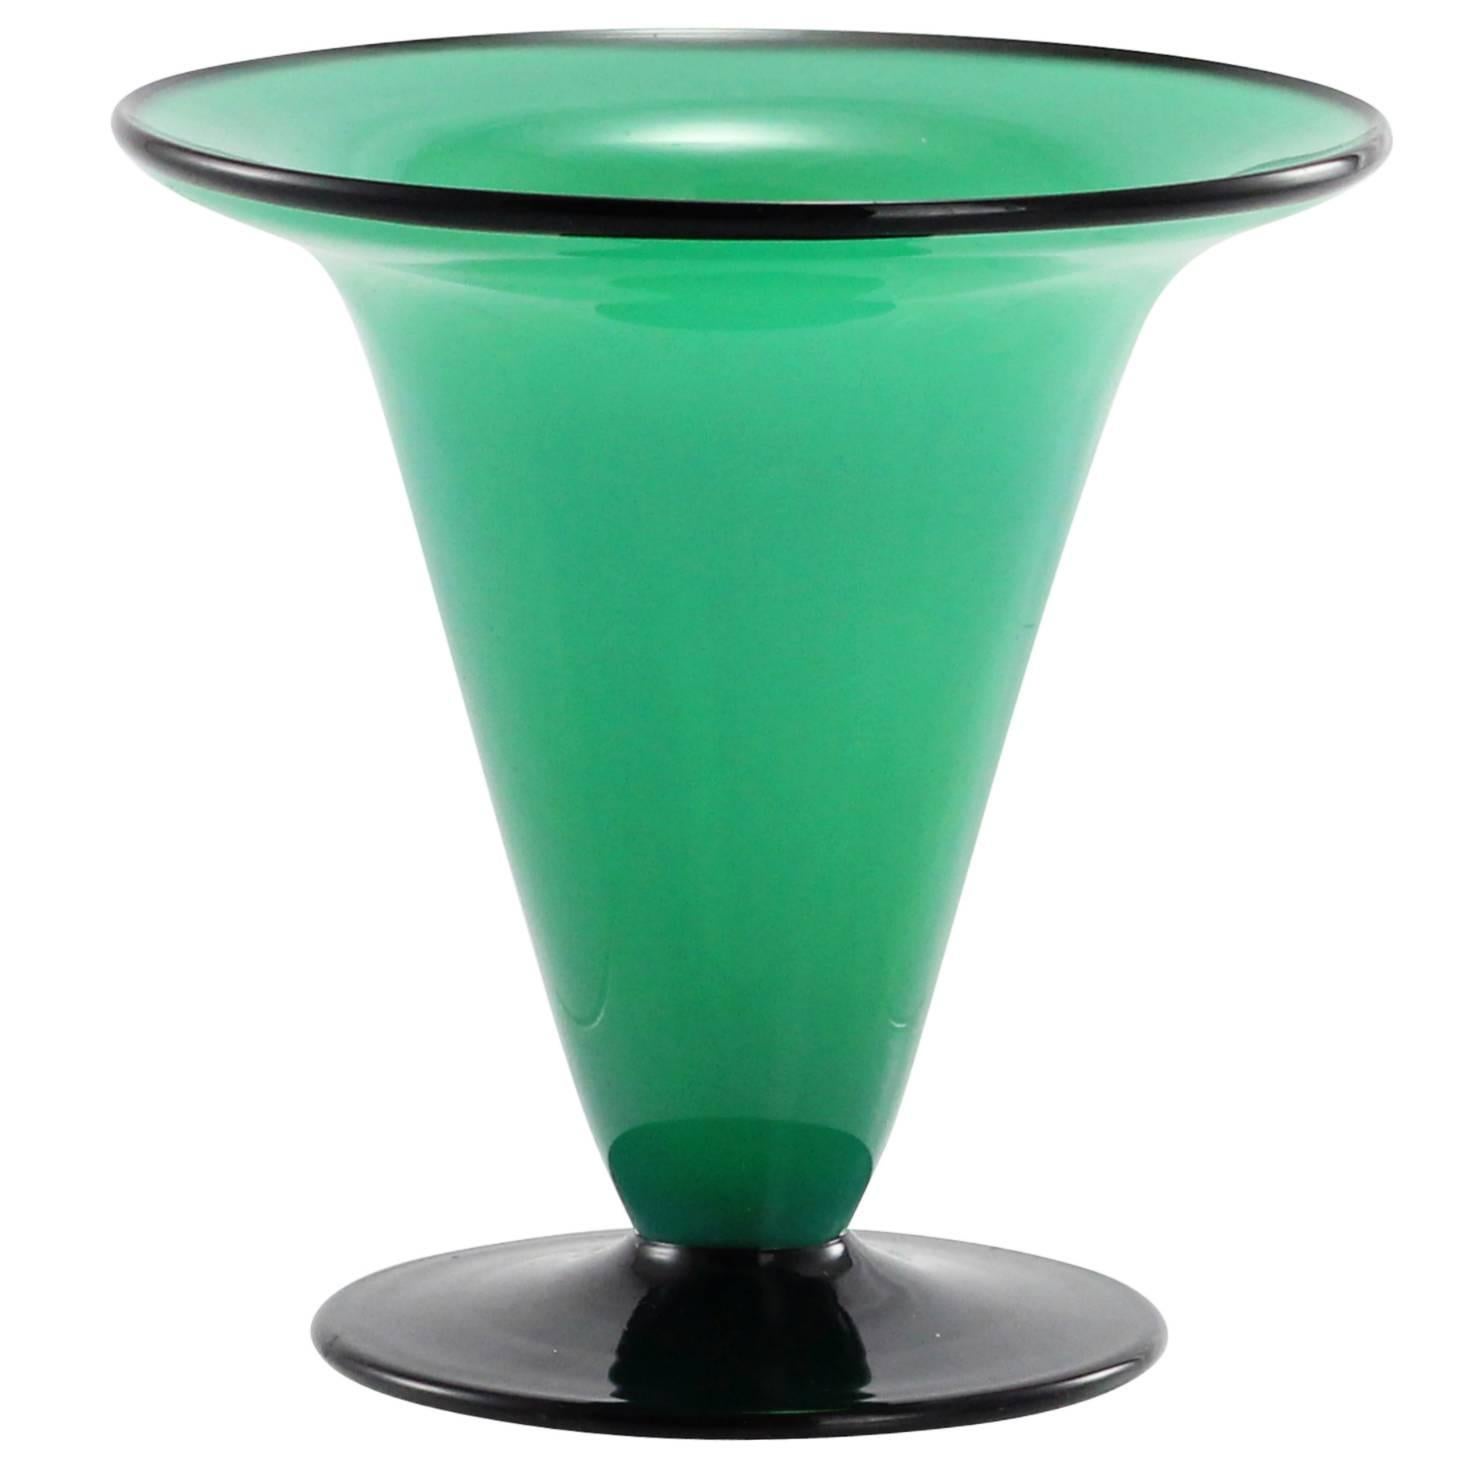 Early 20th Century Art Deco Tango Glass Vase in the Ikora Range by W.M.F For Sale